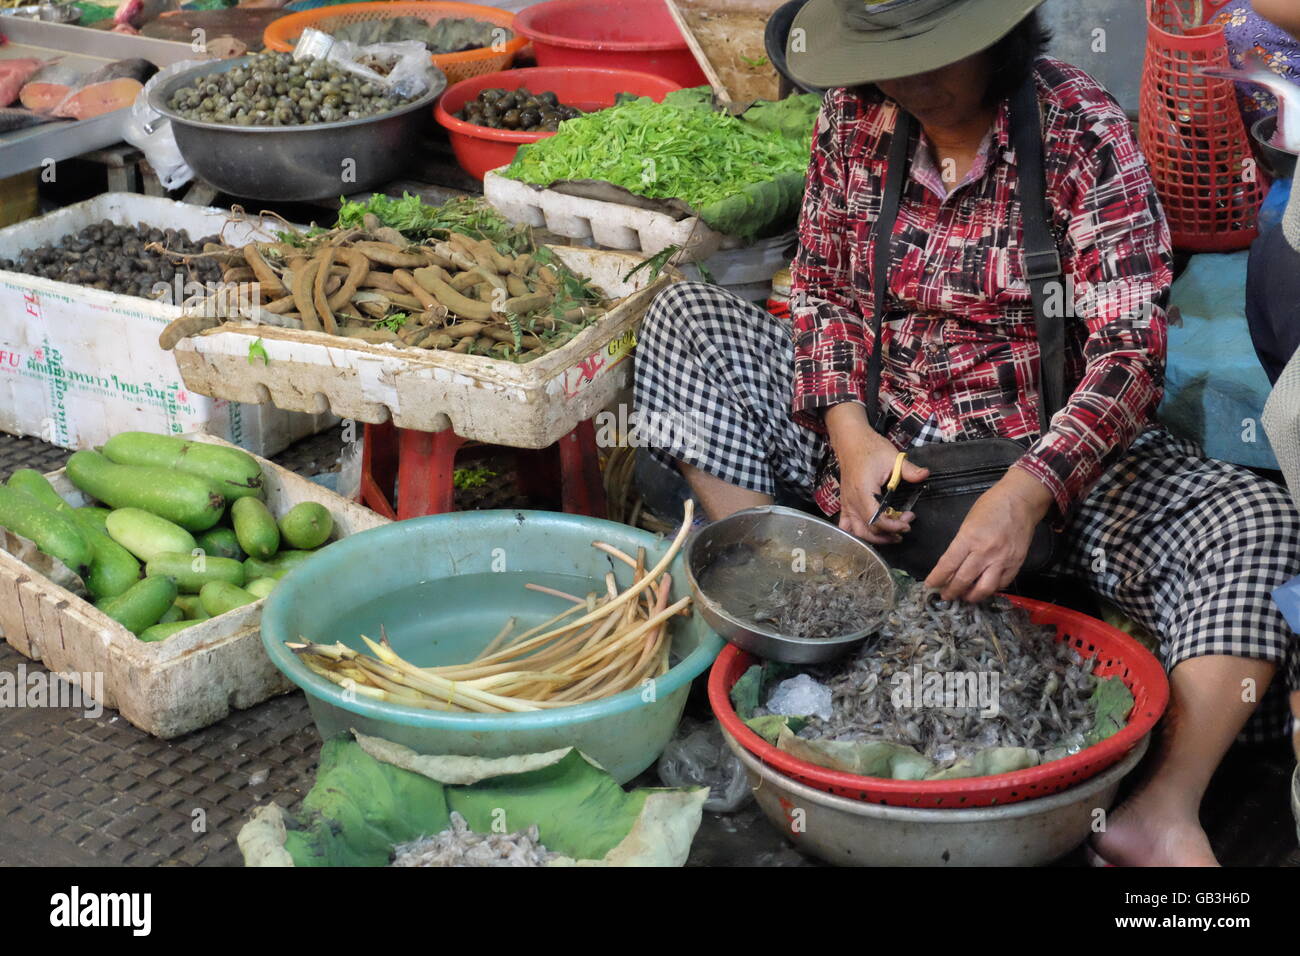 A food stall in the Central Market, Phnom Penh, Cambodia Stock Photo